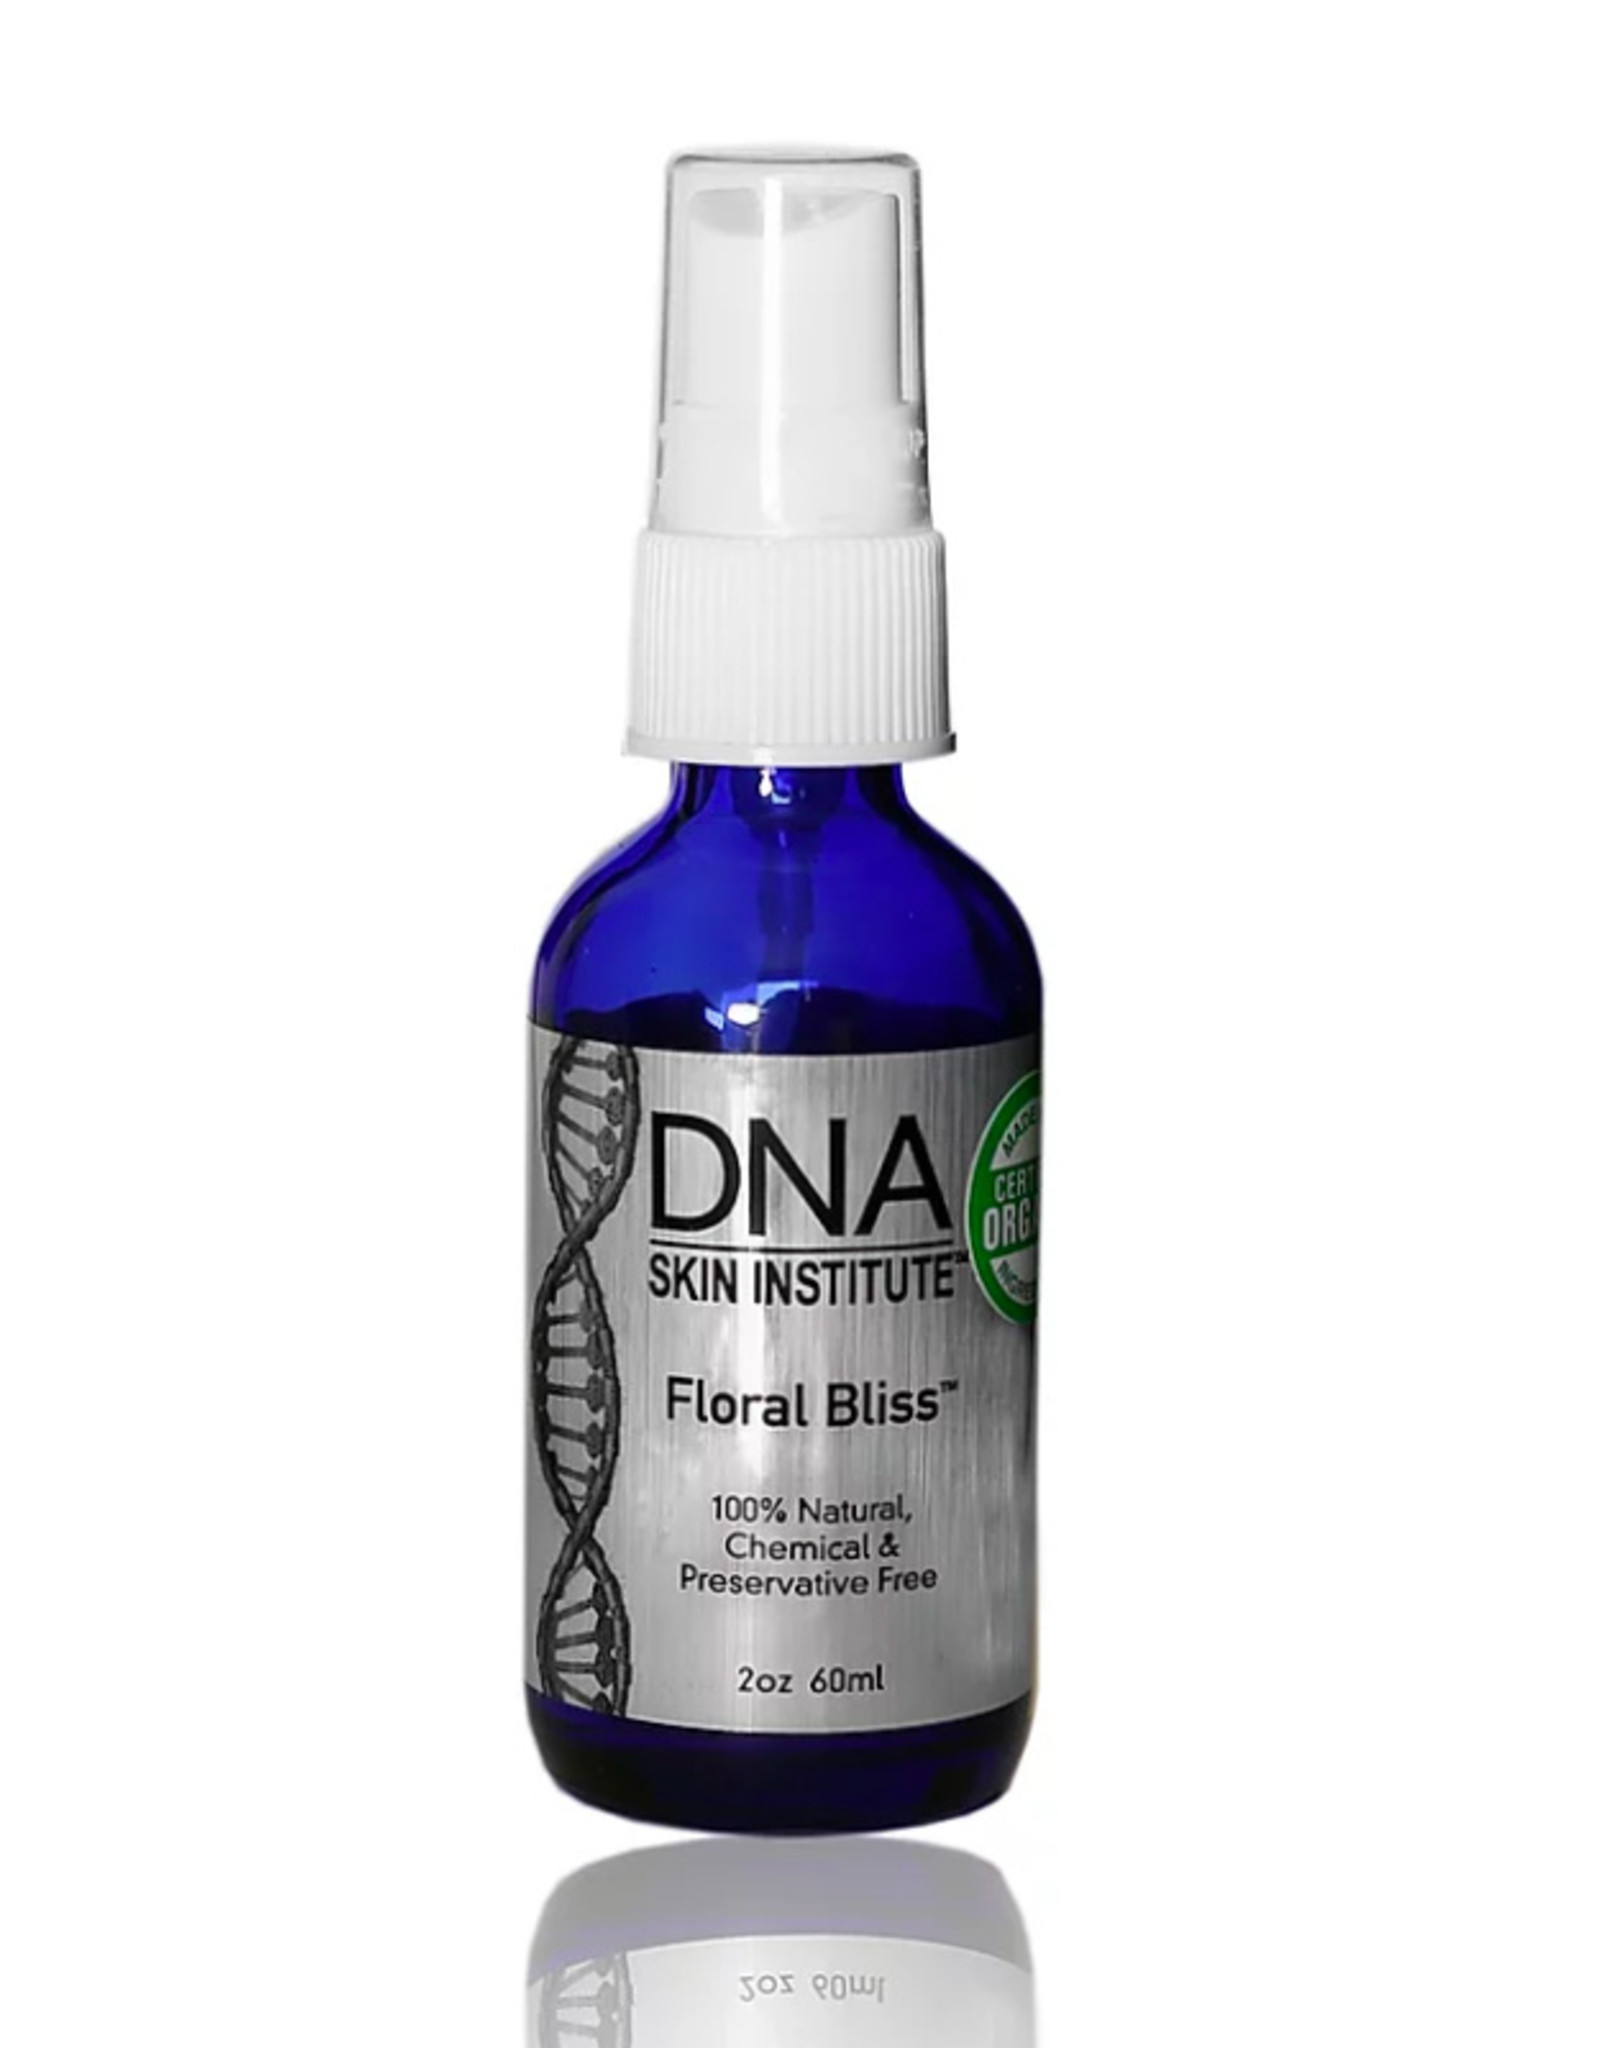 DNA Skin Institute Floral Bliss